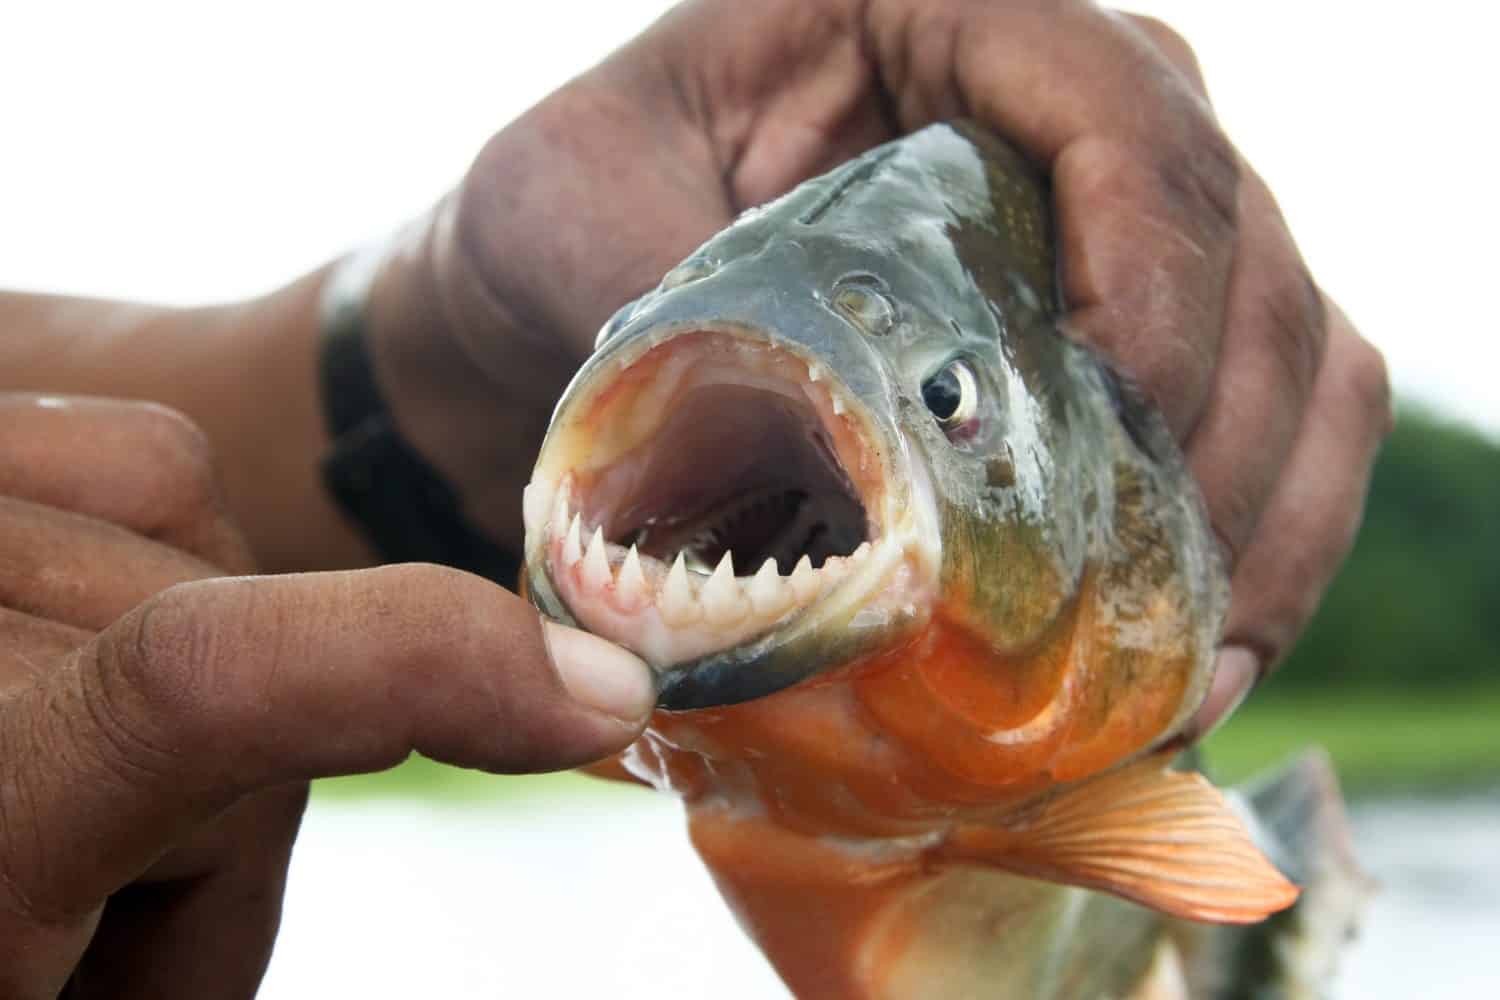 Piranha fish with his mouth open